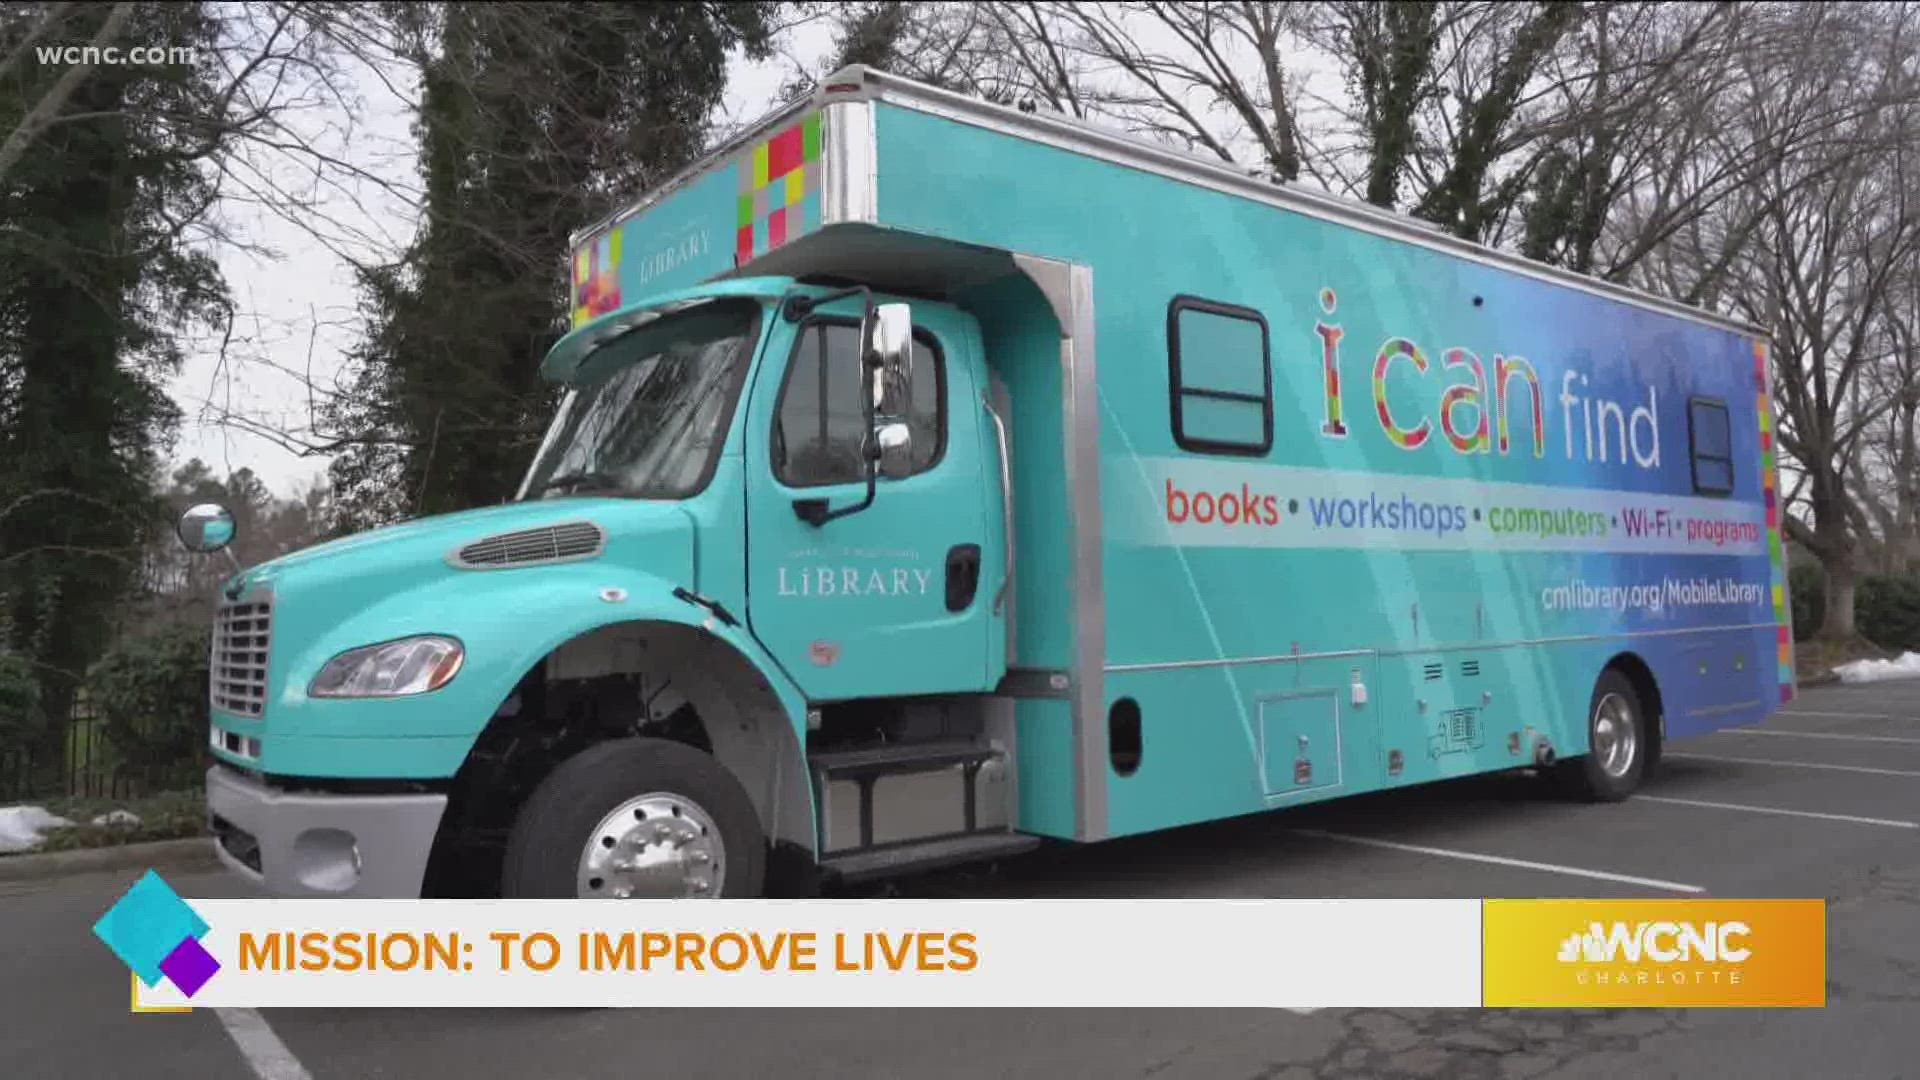 The mobile library mission is to serve the community